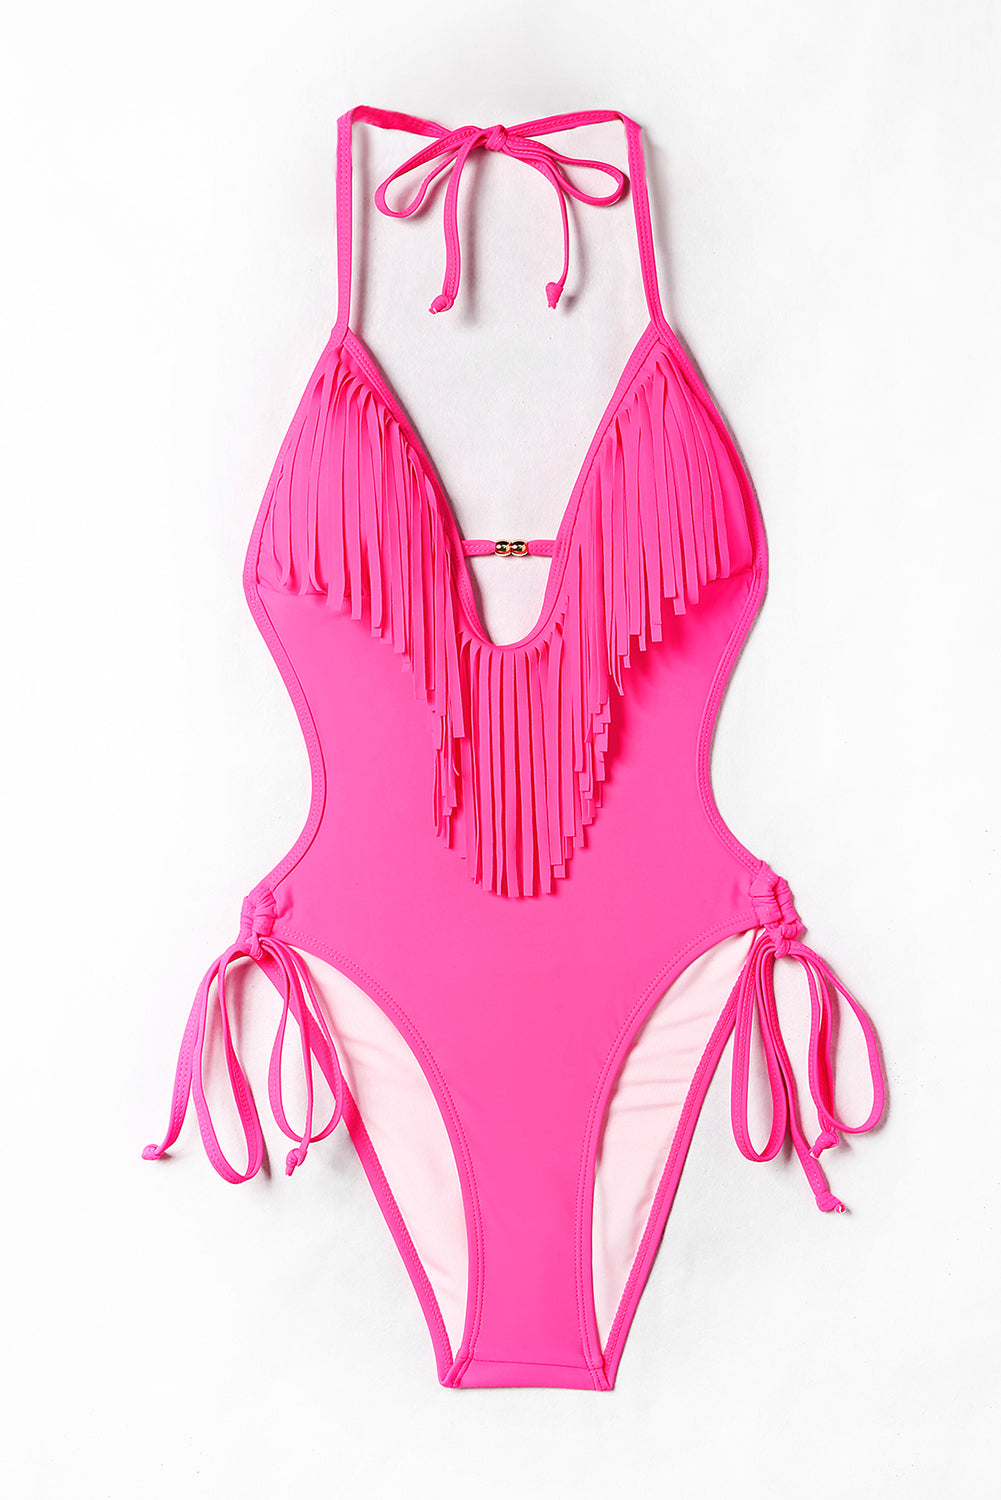 LC443432-6-S, LC443432-6-M, LC443432-6-L, LC443432-6-XL, LC443432-6-2XL, Rose Tassel One Piece Swimsuits for Women Halter Backless Sexy Swimwear